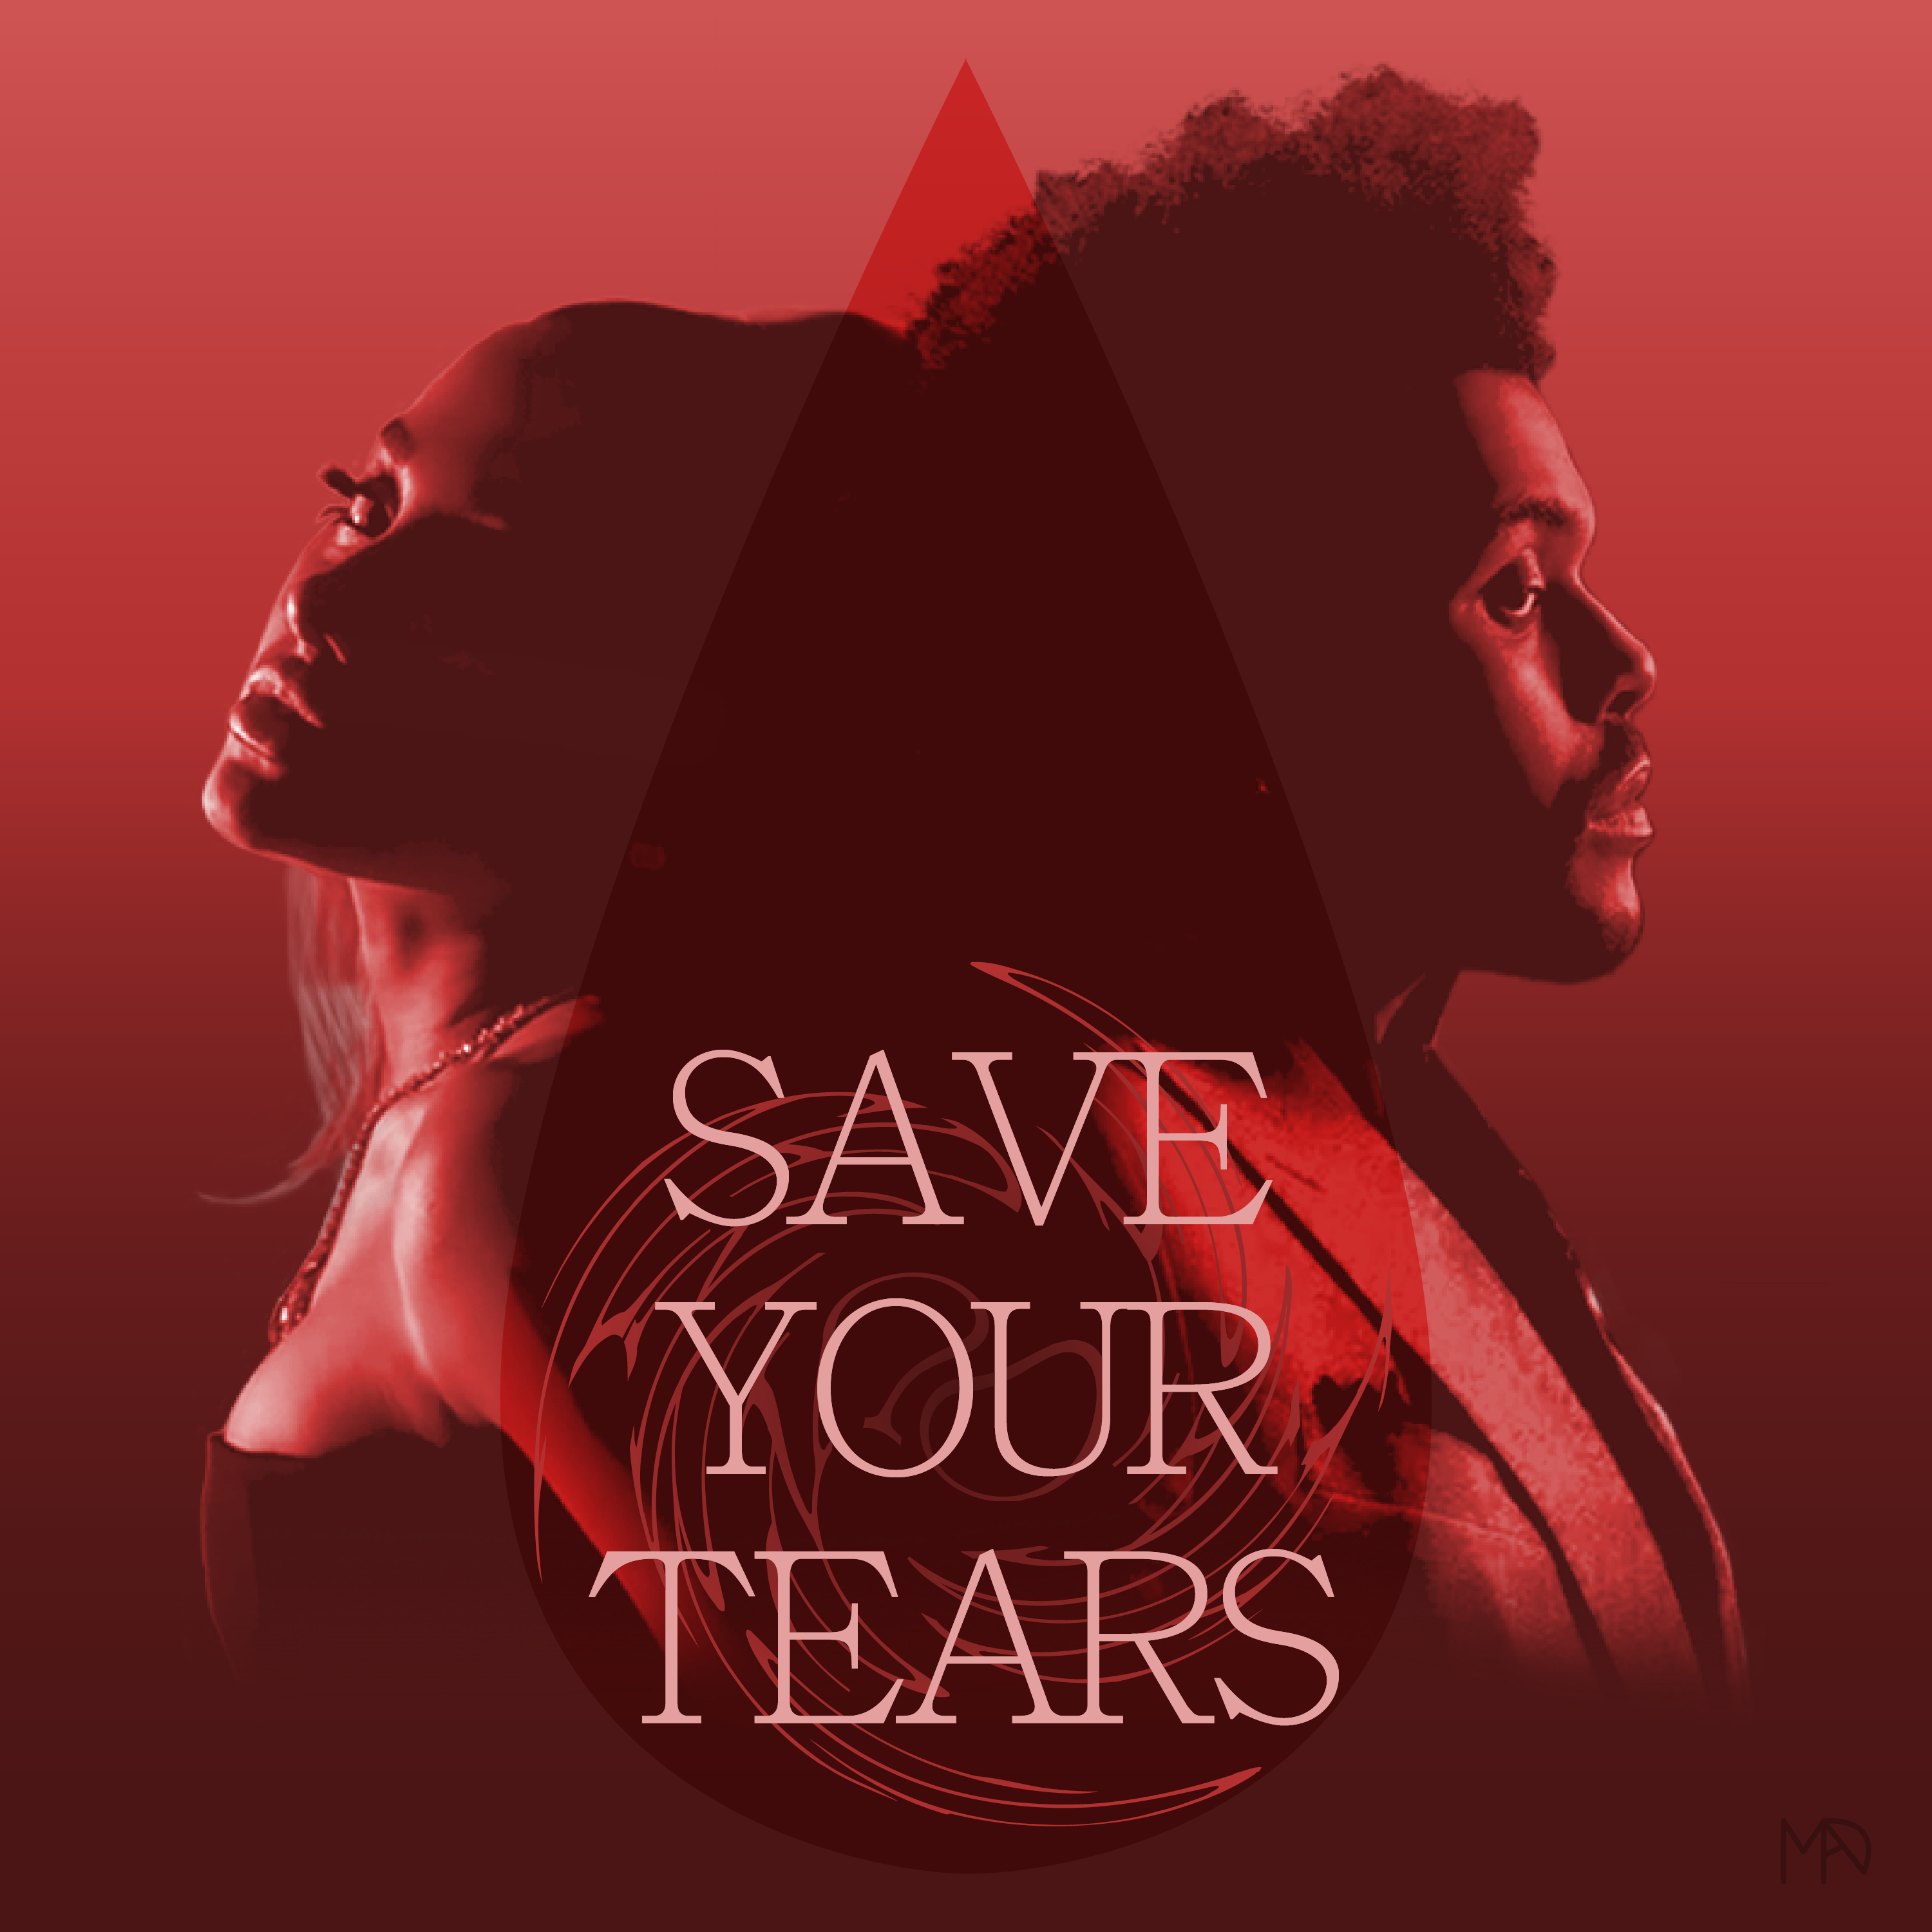 Cover, Phone and PC Wallpaper for Save Your tears remix. 5 MIN HYPE: TheWeeknd